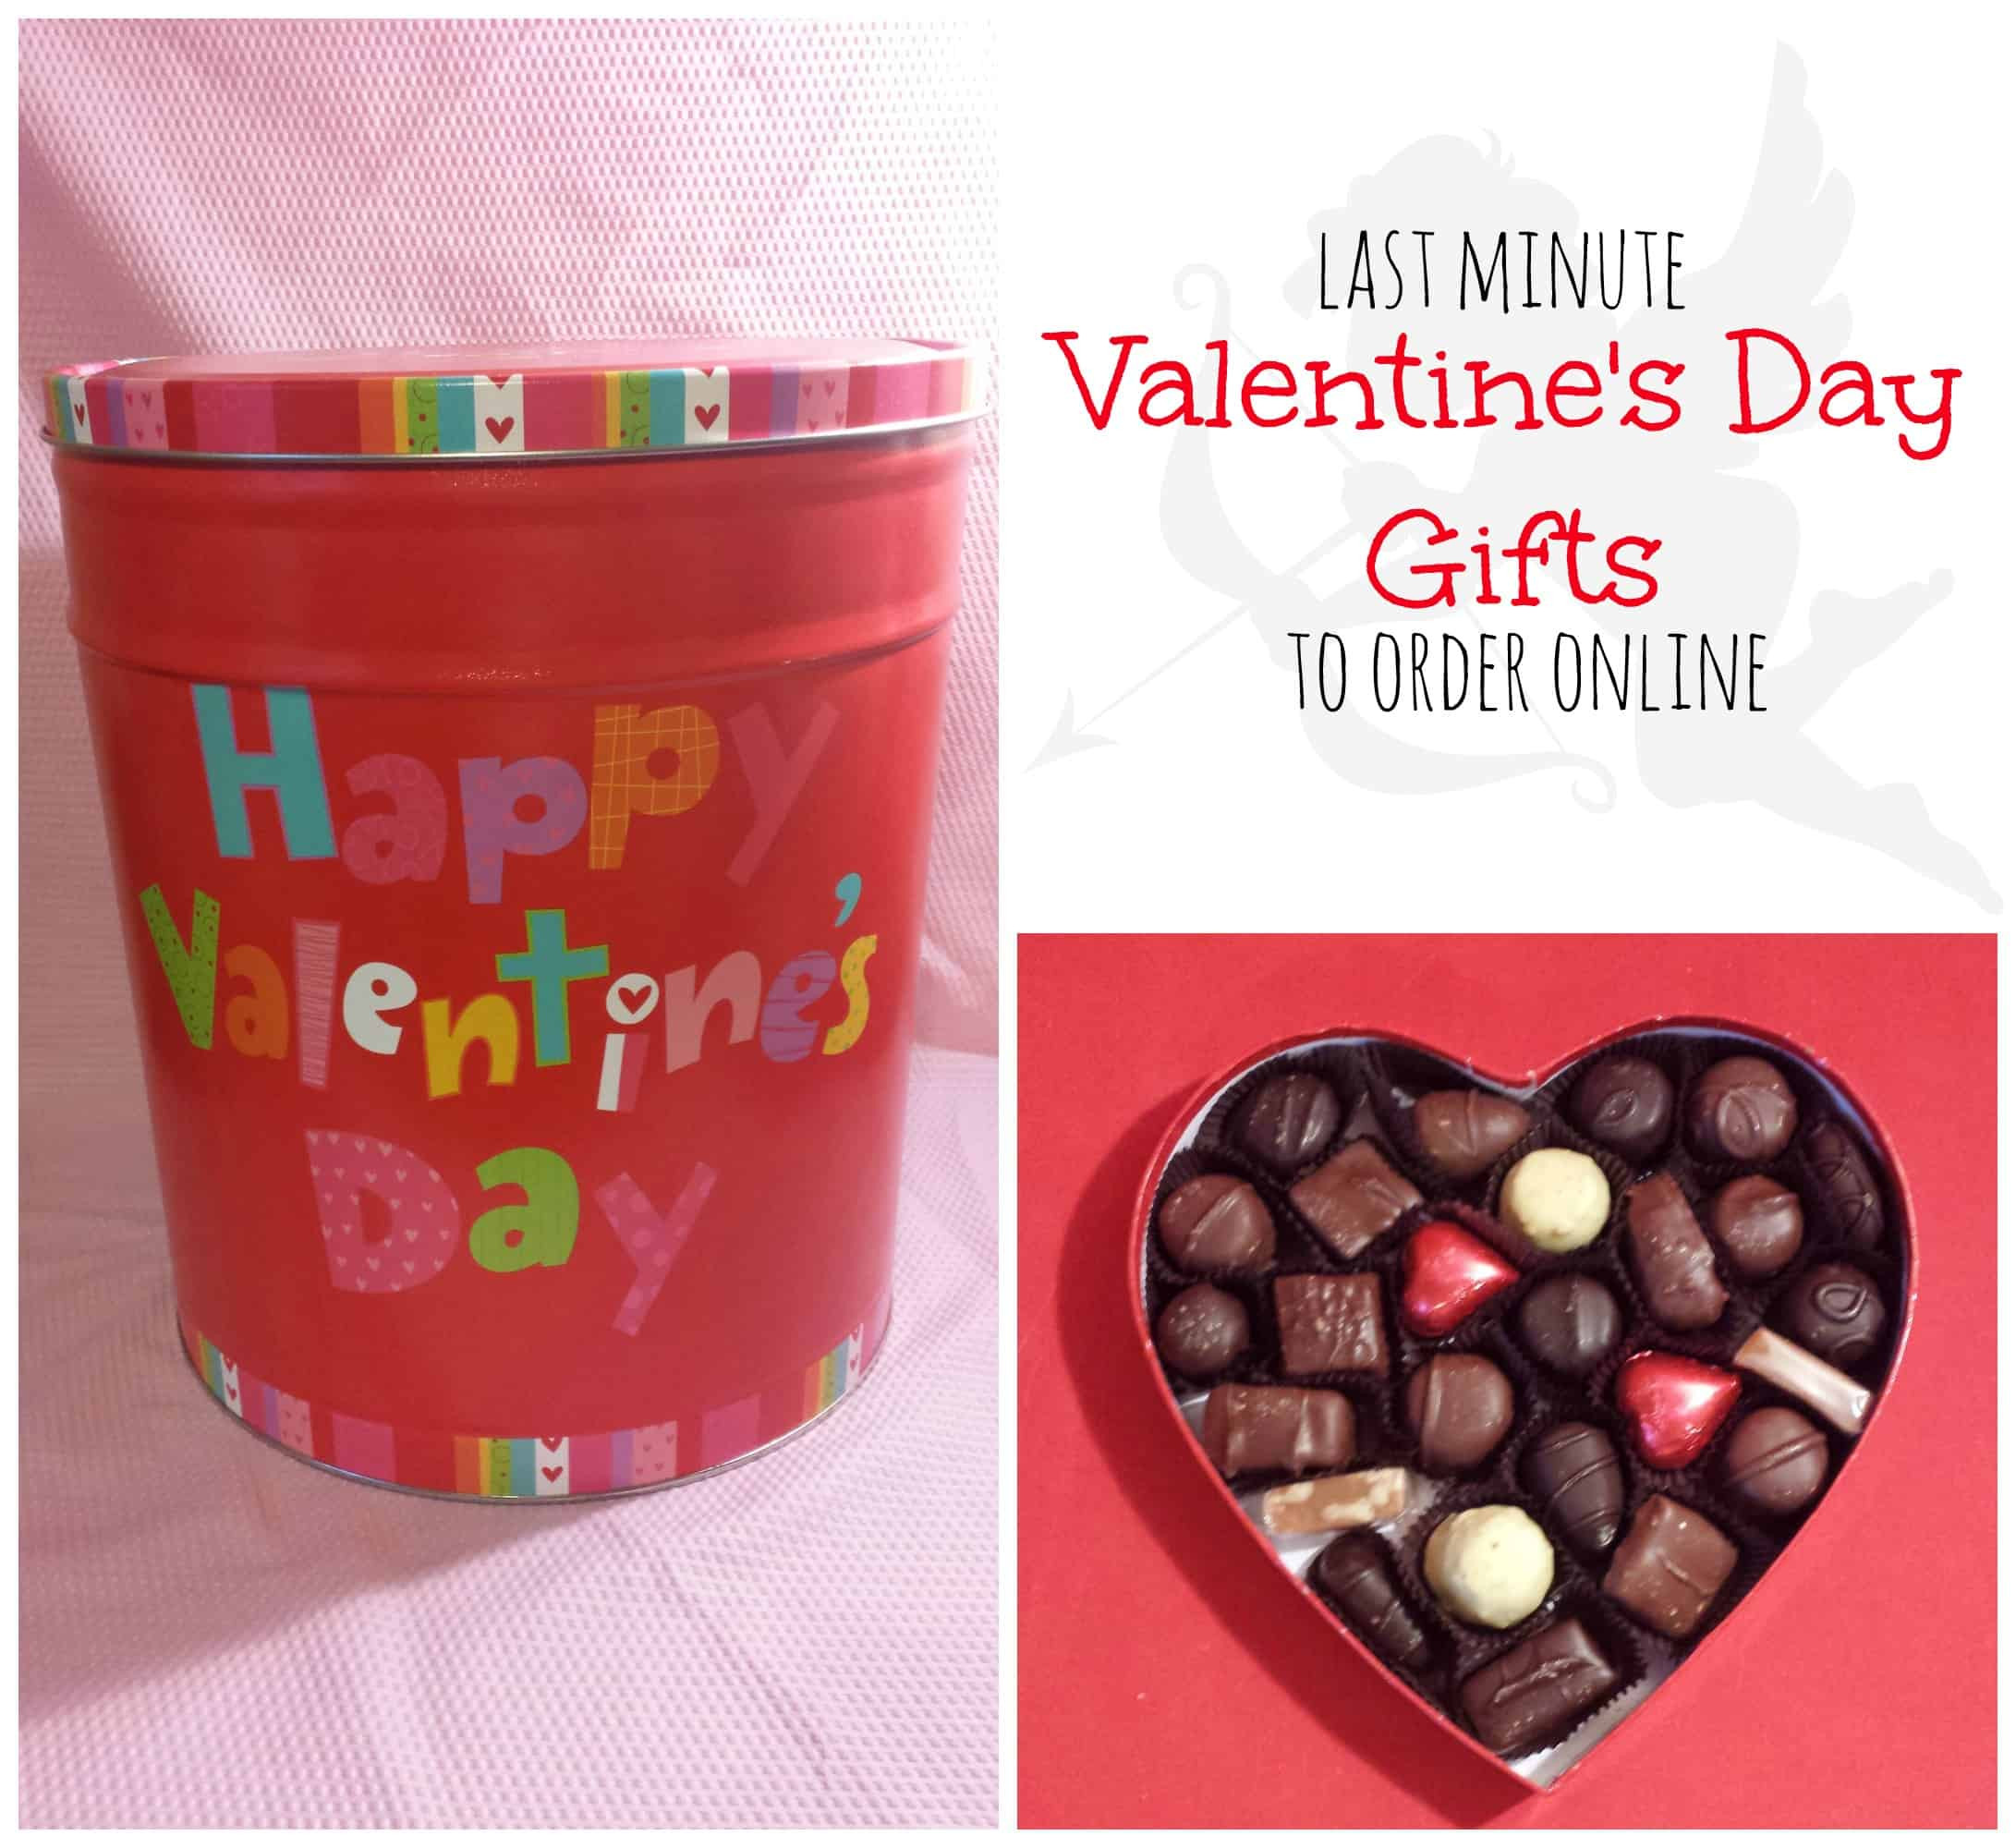 Online Valentines Gift Ideas
 Last Minute Valentine s Day Gifts to Order line